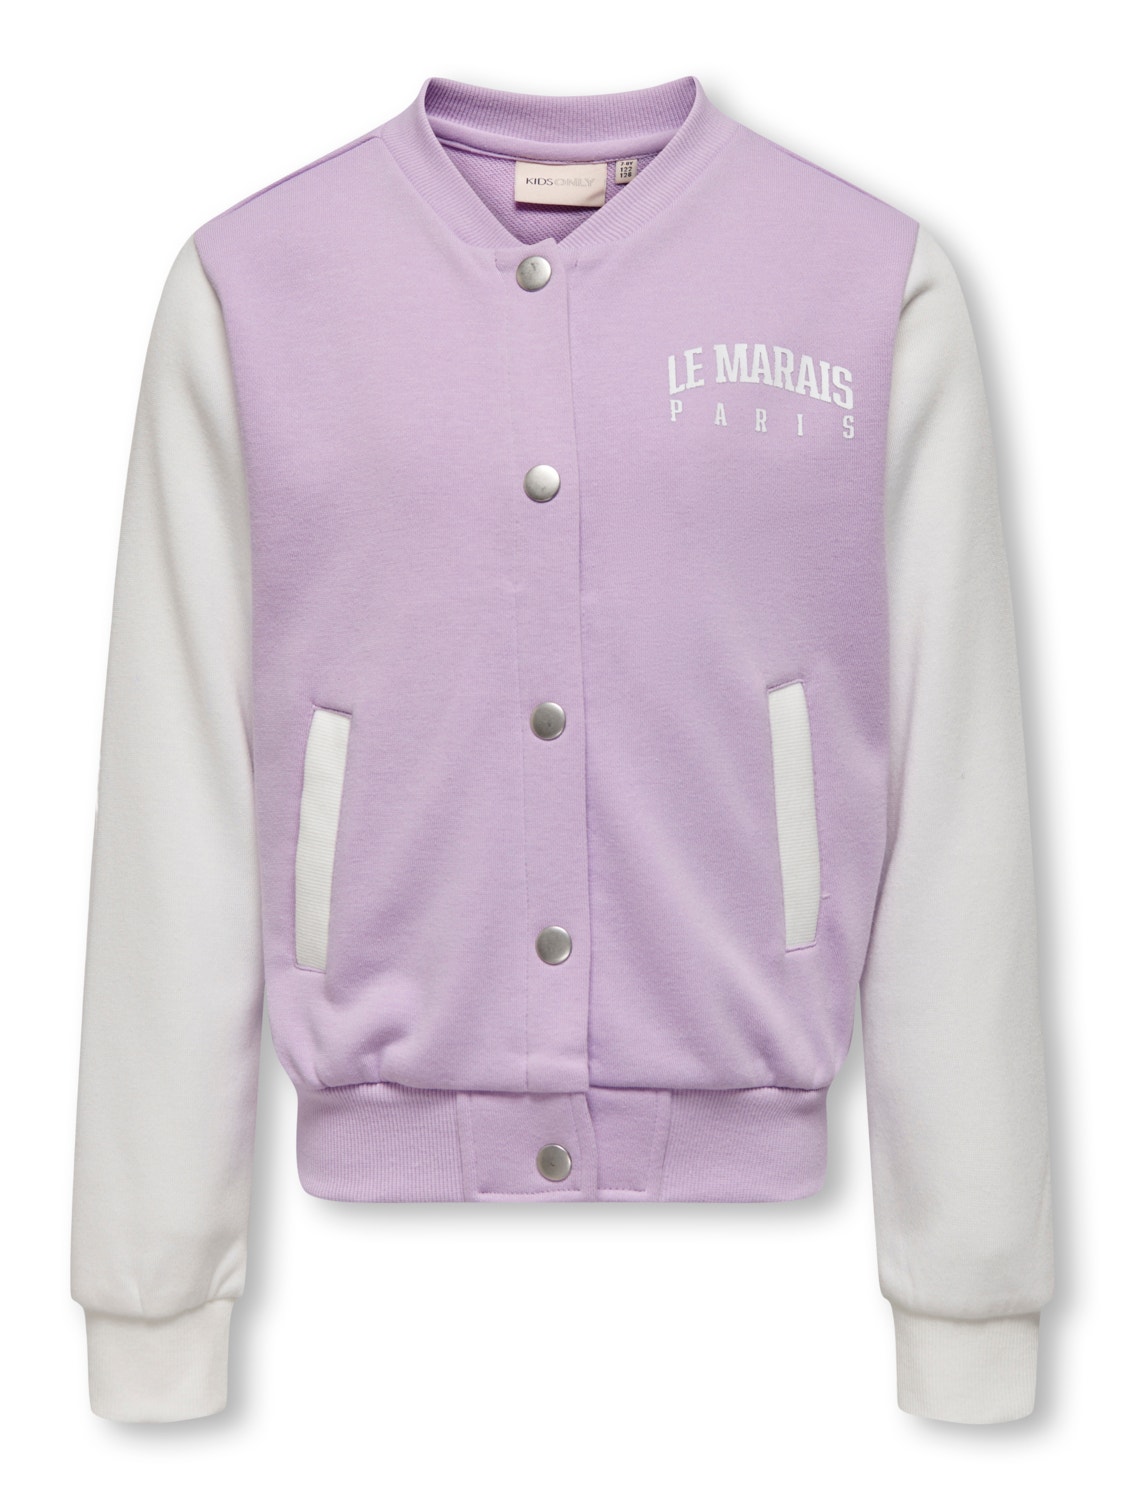 ONLY o-neck jacket with buttons -Lavendula - 15302789